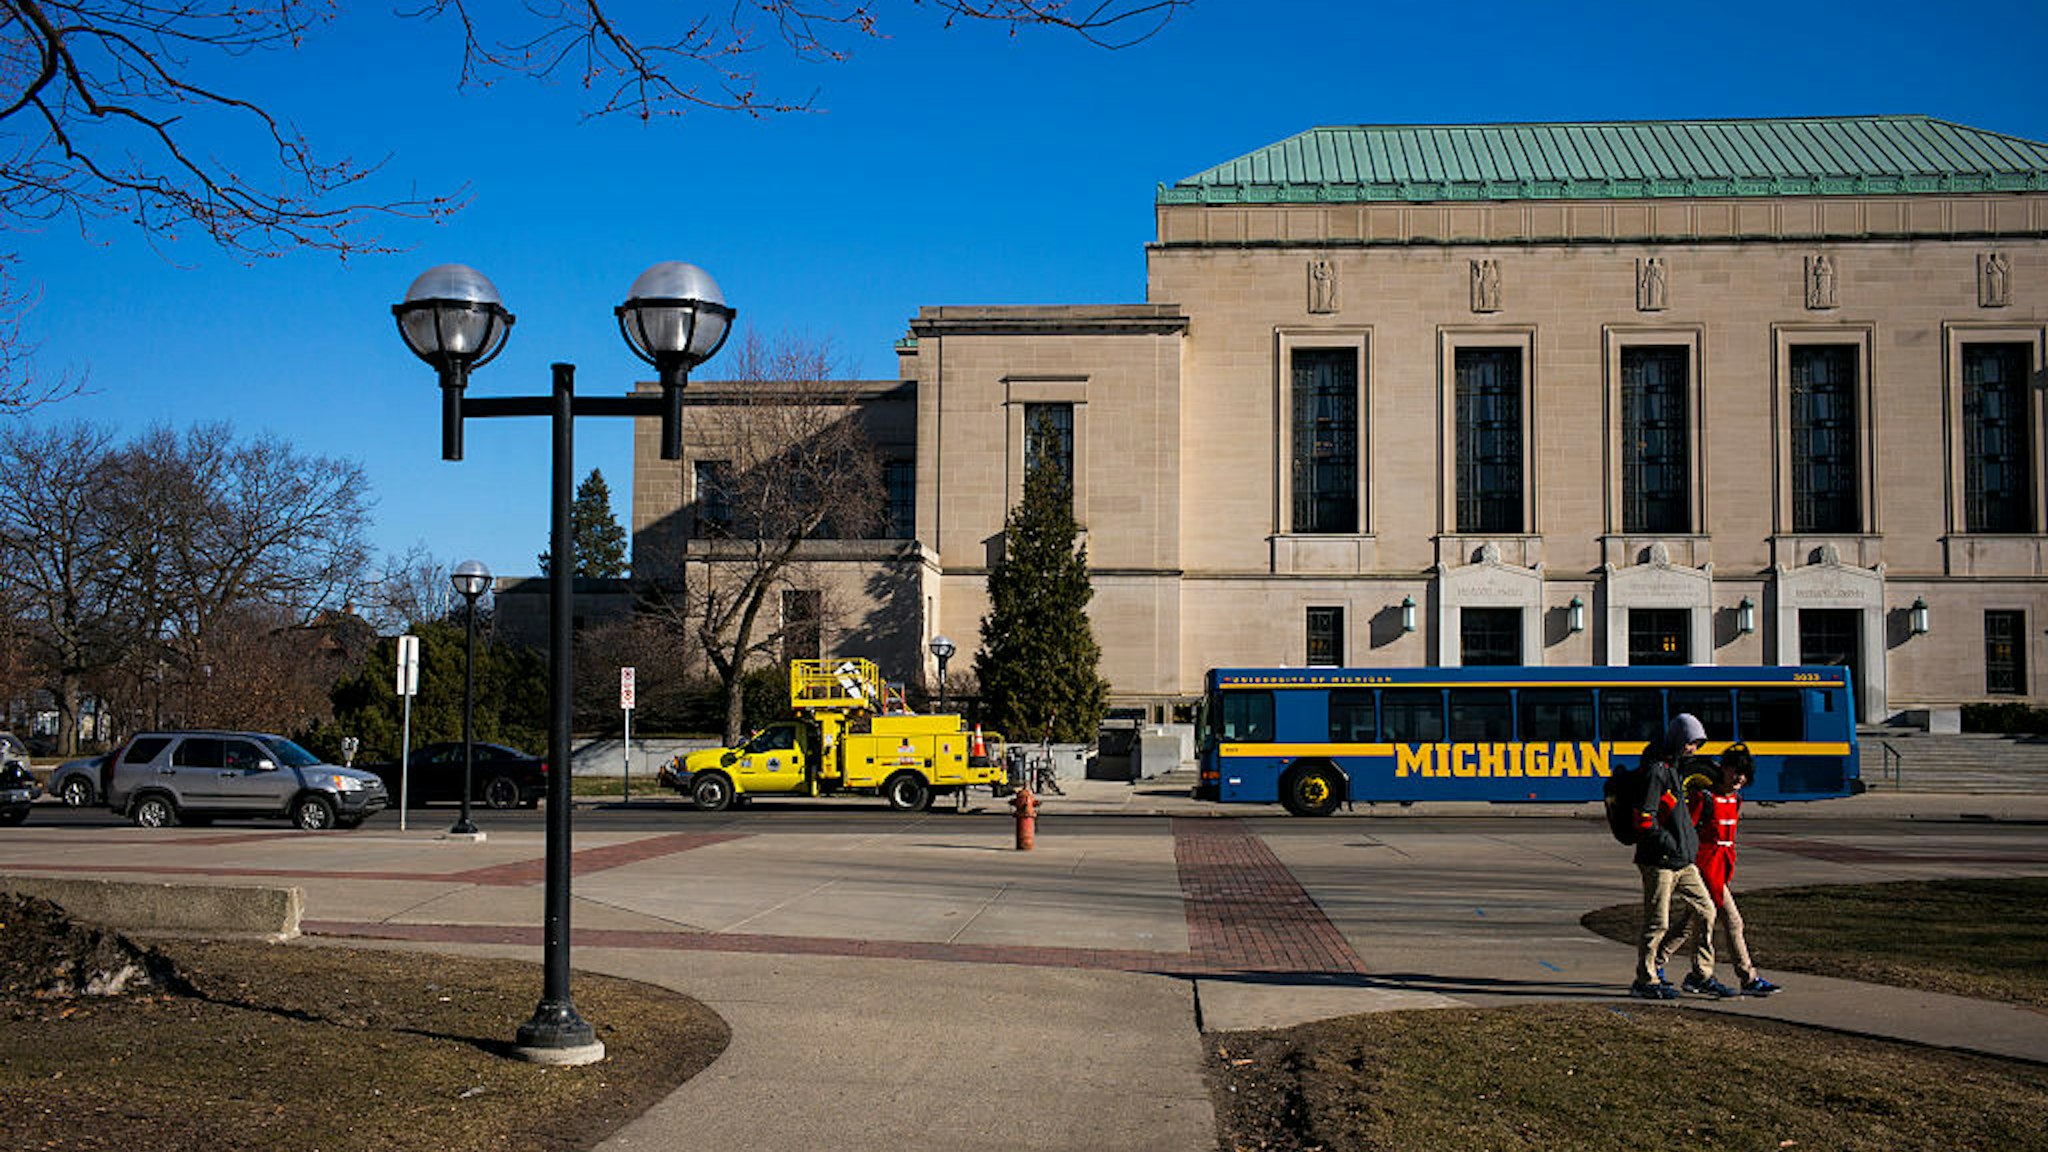 The Horace H. Rackham School of Graduate Studies Building is viewed on the central campus March 24, 2015 at the University of Michigan in Ann Arbor, Michigan.